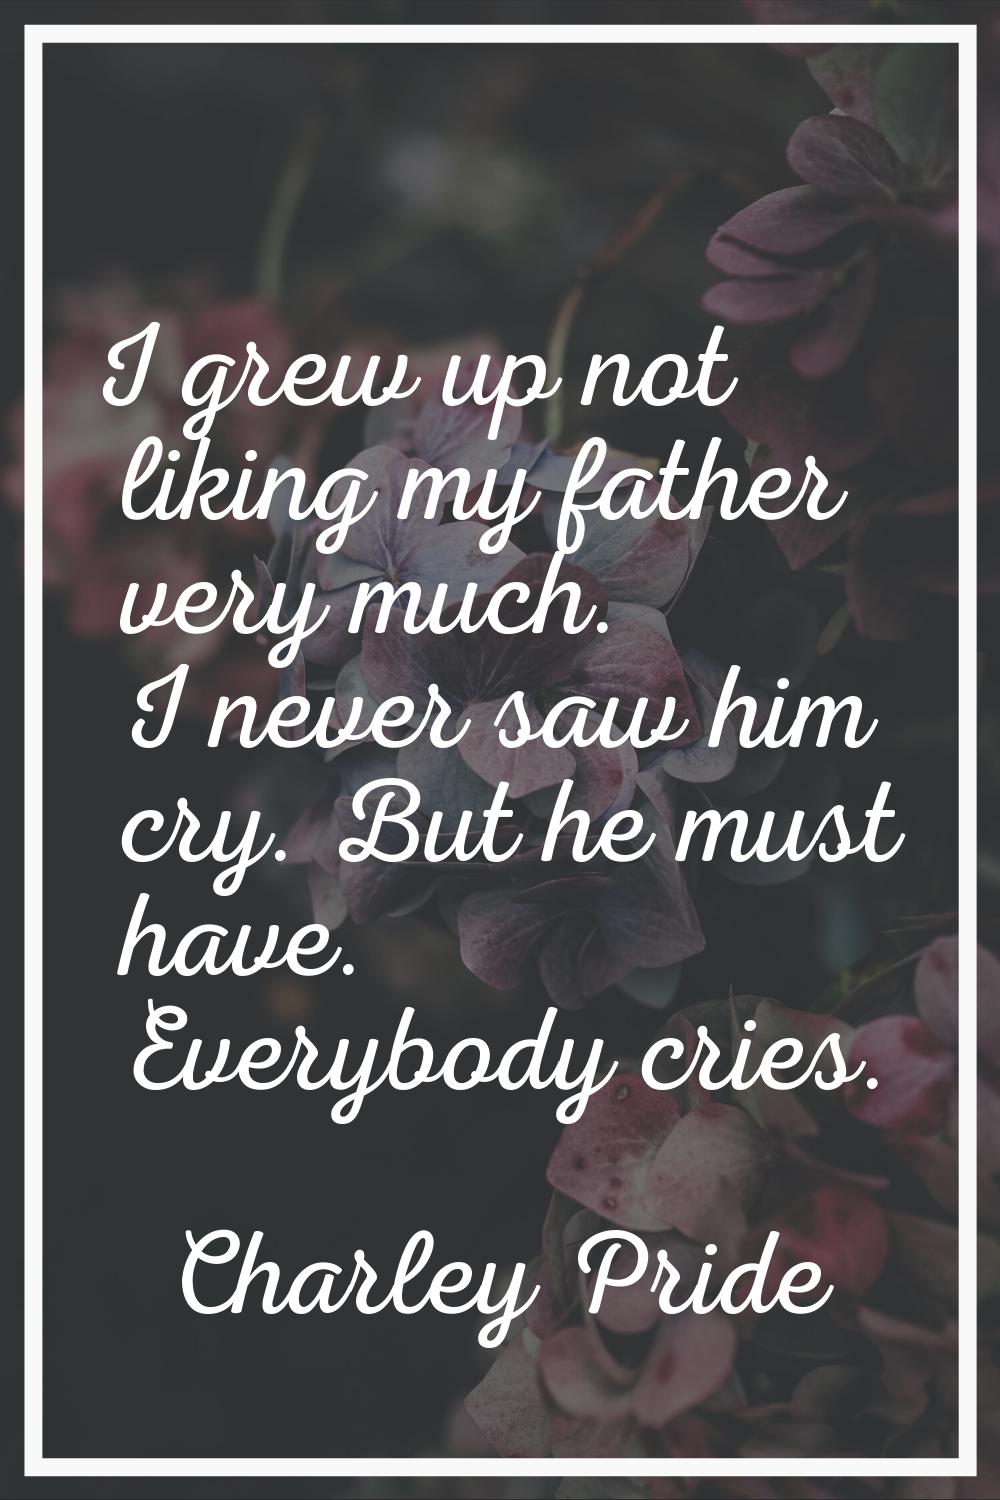 I grew up not liking my father very much. I never saw him cry. But he must have. Everybody cries.